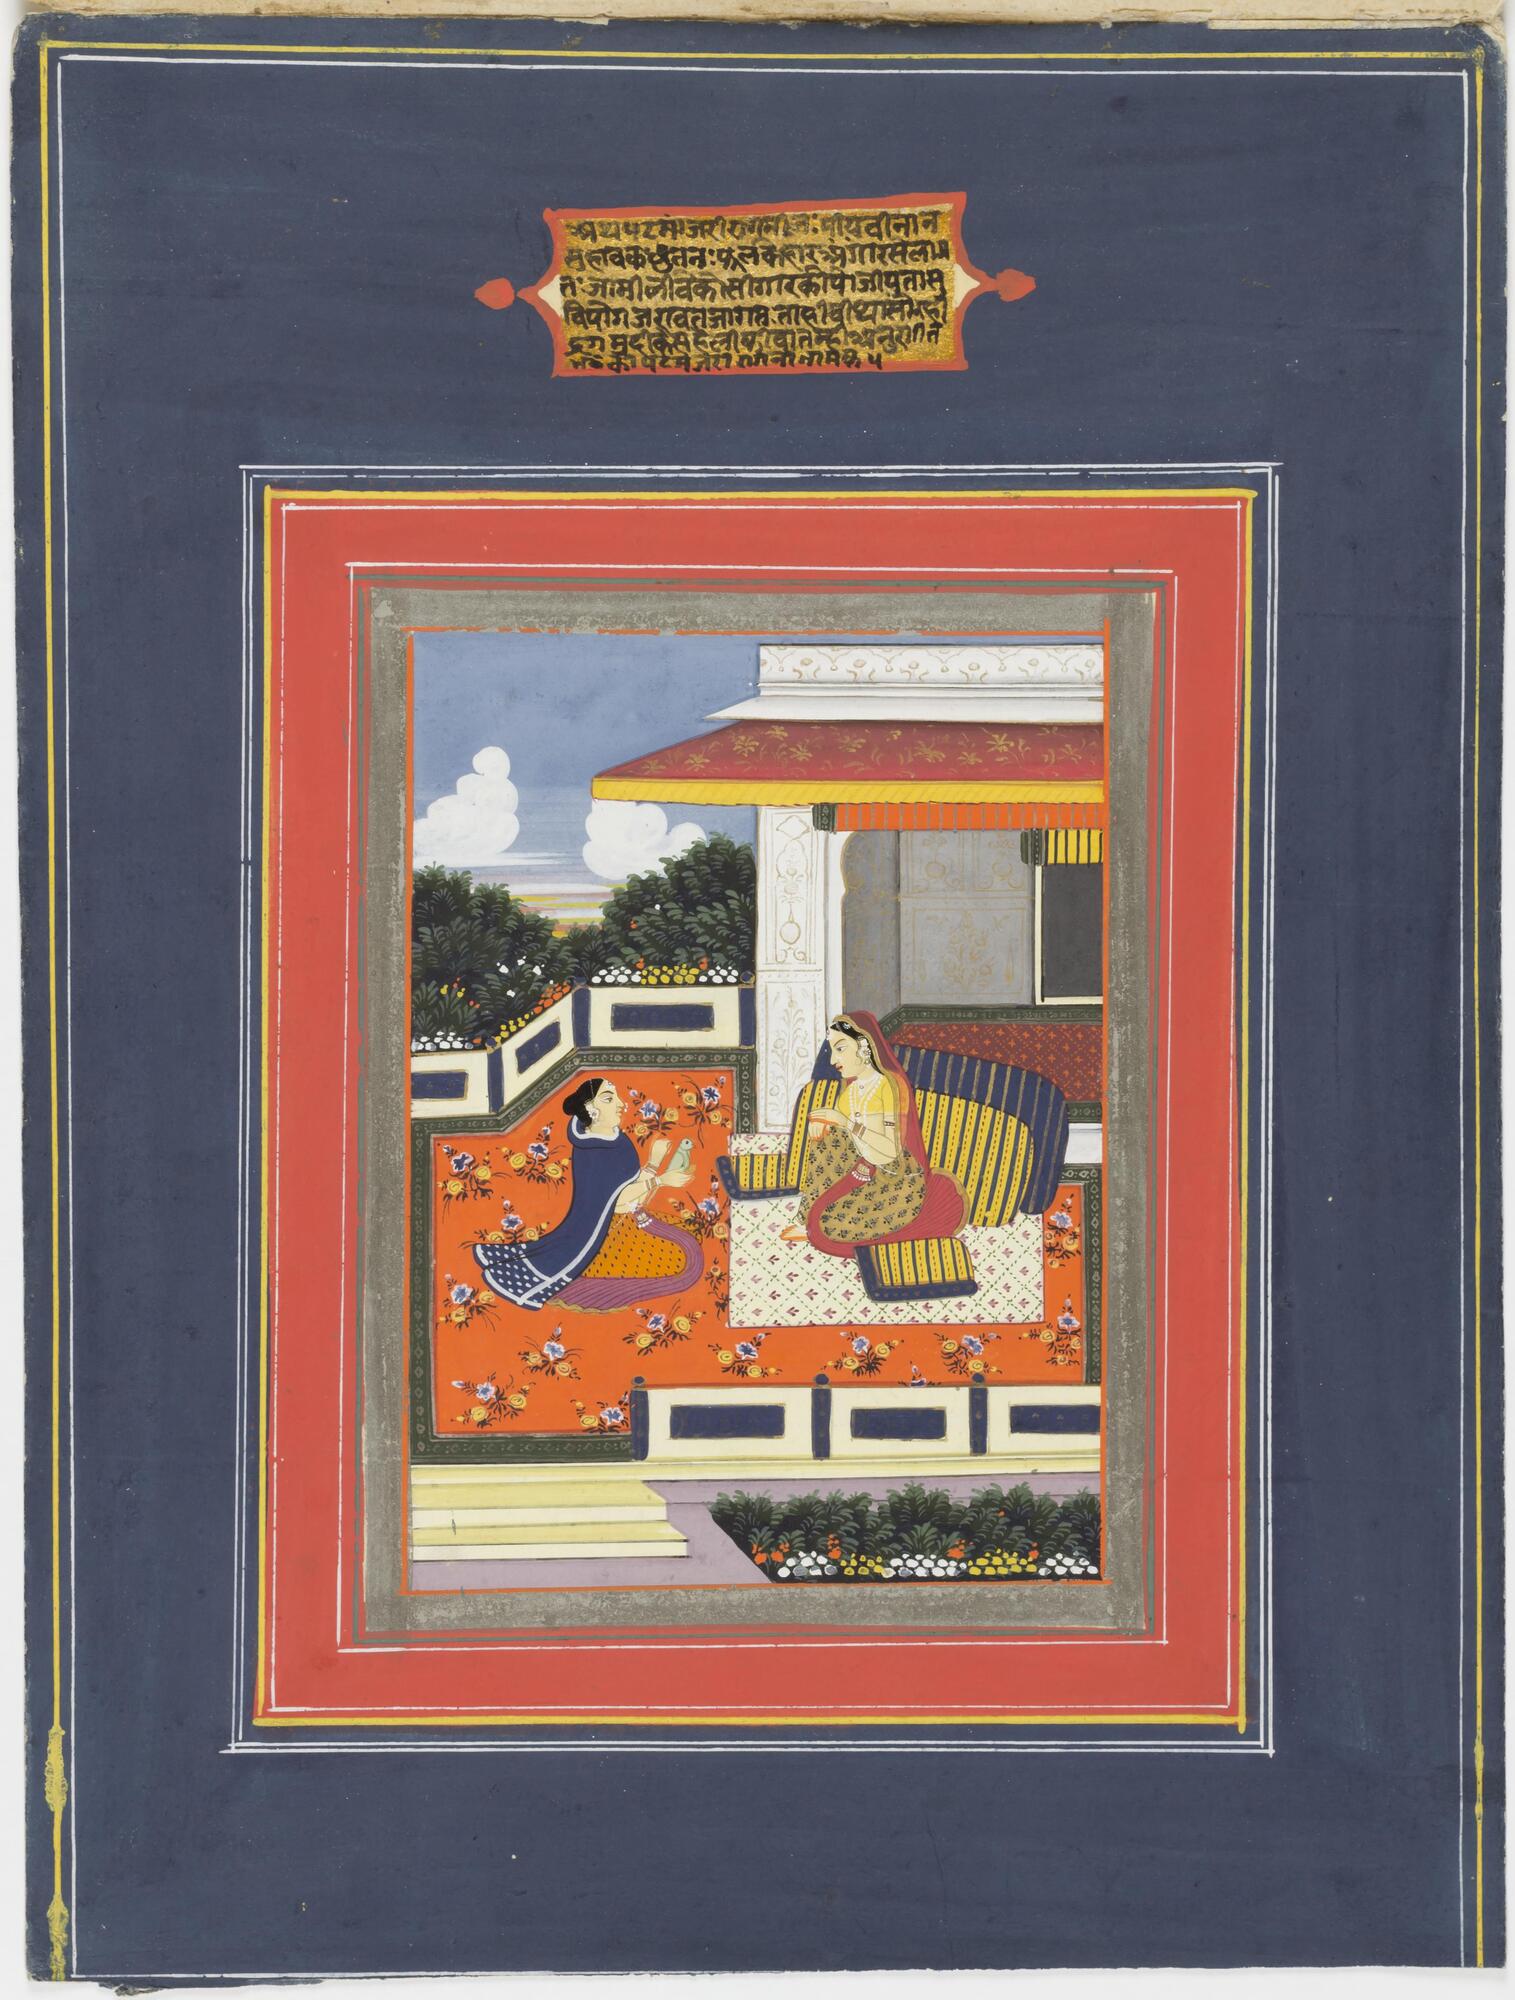 A lady sits on a low-rise bed, facing her attendant. The attendant is holding a parrot, and the lady's gaze is directed towards the bird. It is daytime and an open pavilion is situated behind them. A short verse is painted above the depicted scene.